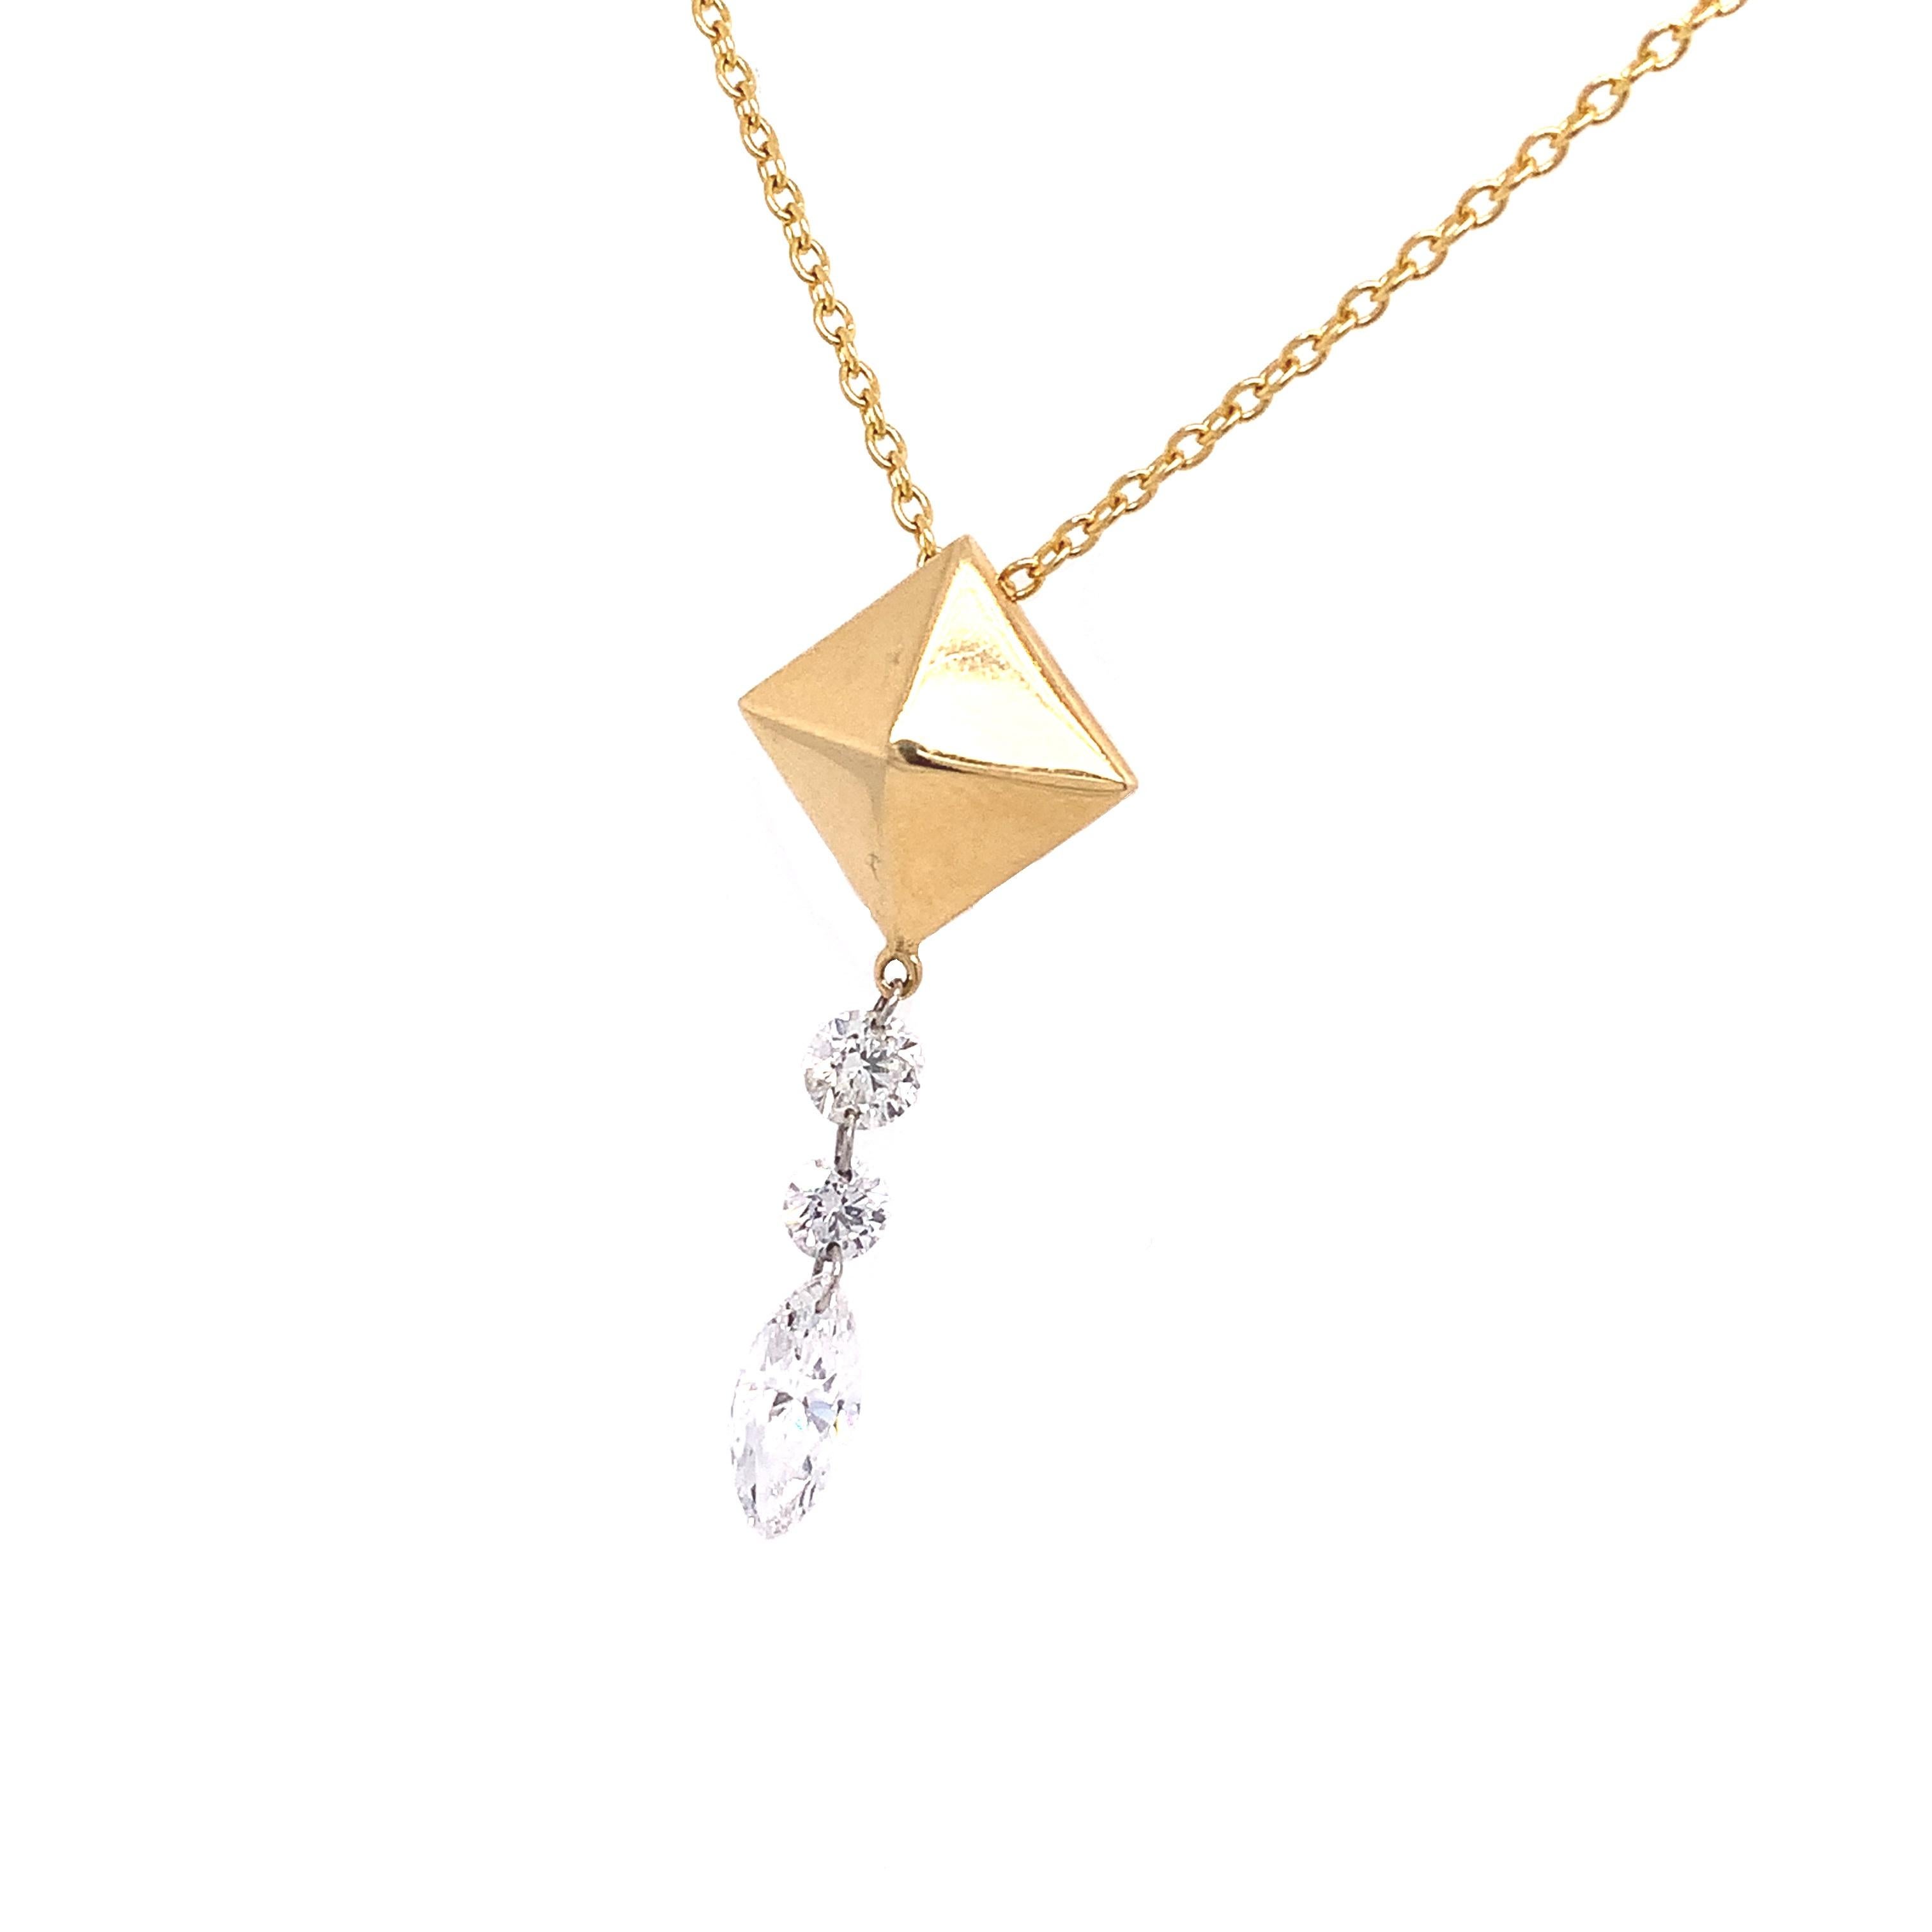 Dangling Diamond Collection,

In this collection Lucea releases their Diamonds  to allow the maximum amount of brilliance of the Diamond by piercing them with a platinum ring letting them dangle freely. This 18K gold piece is attached to an